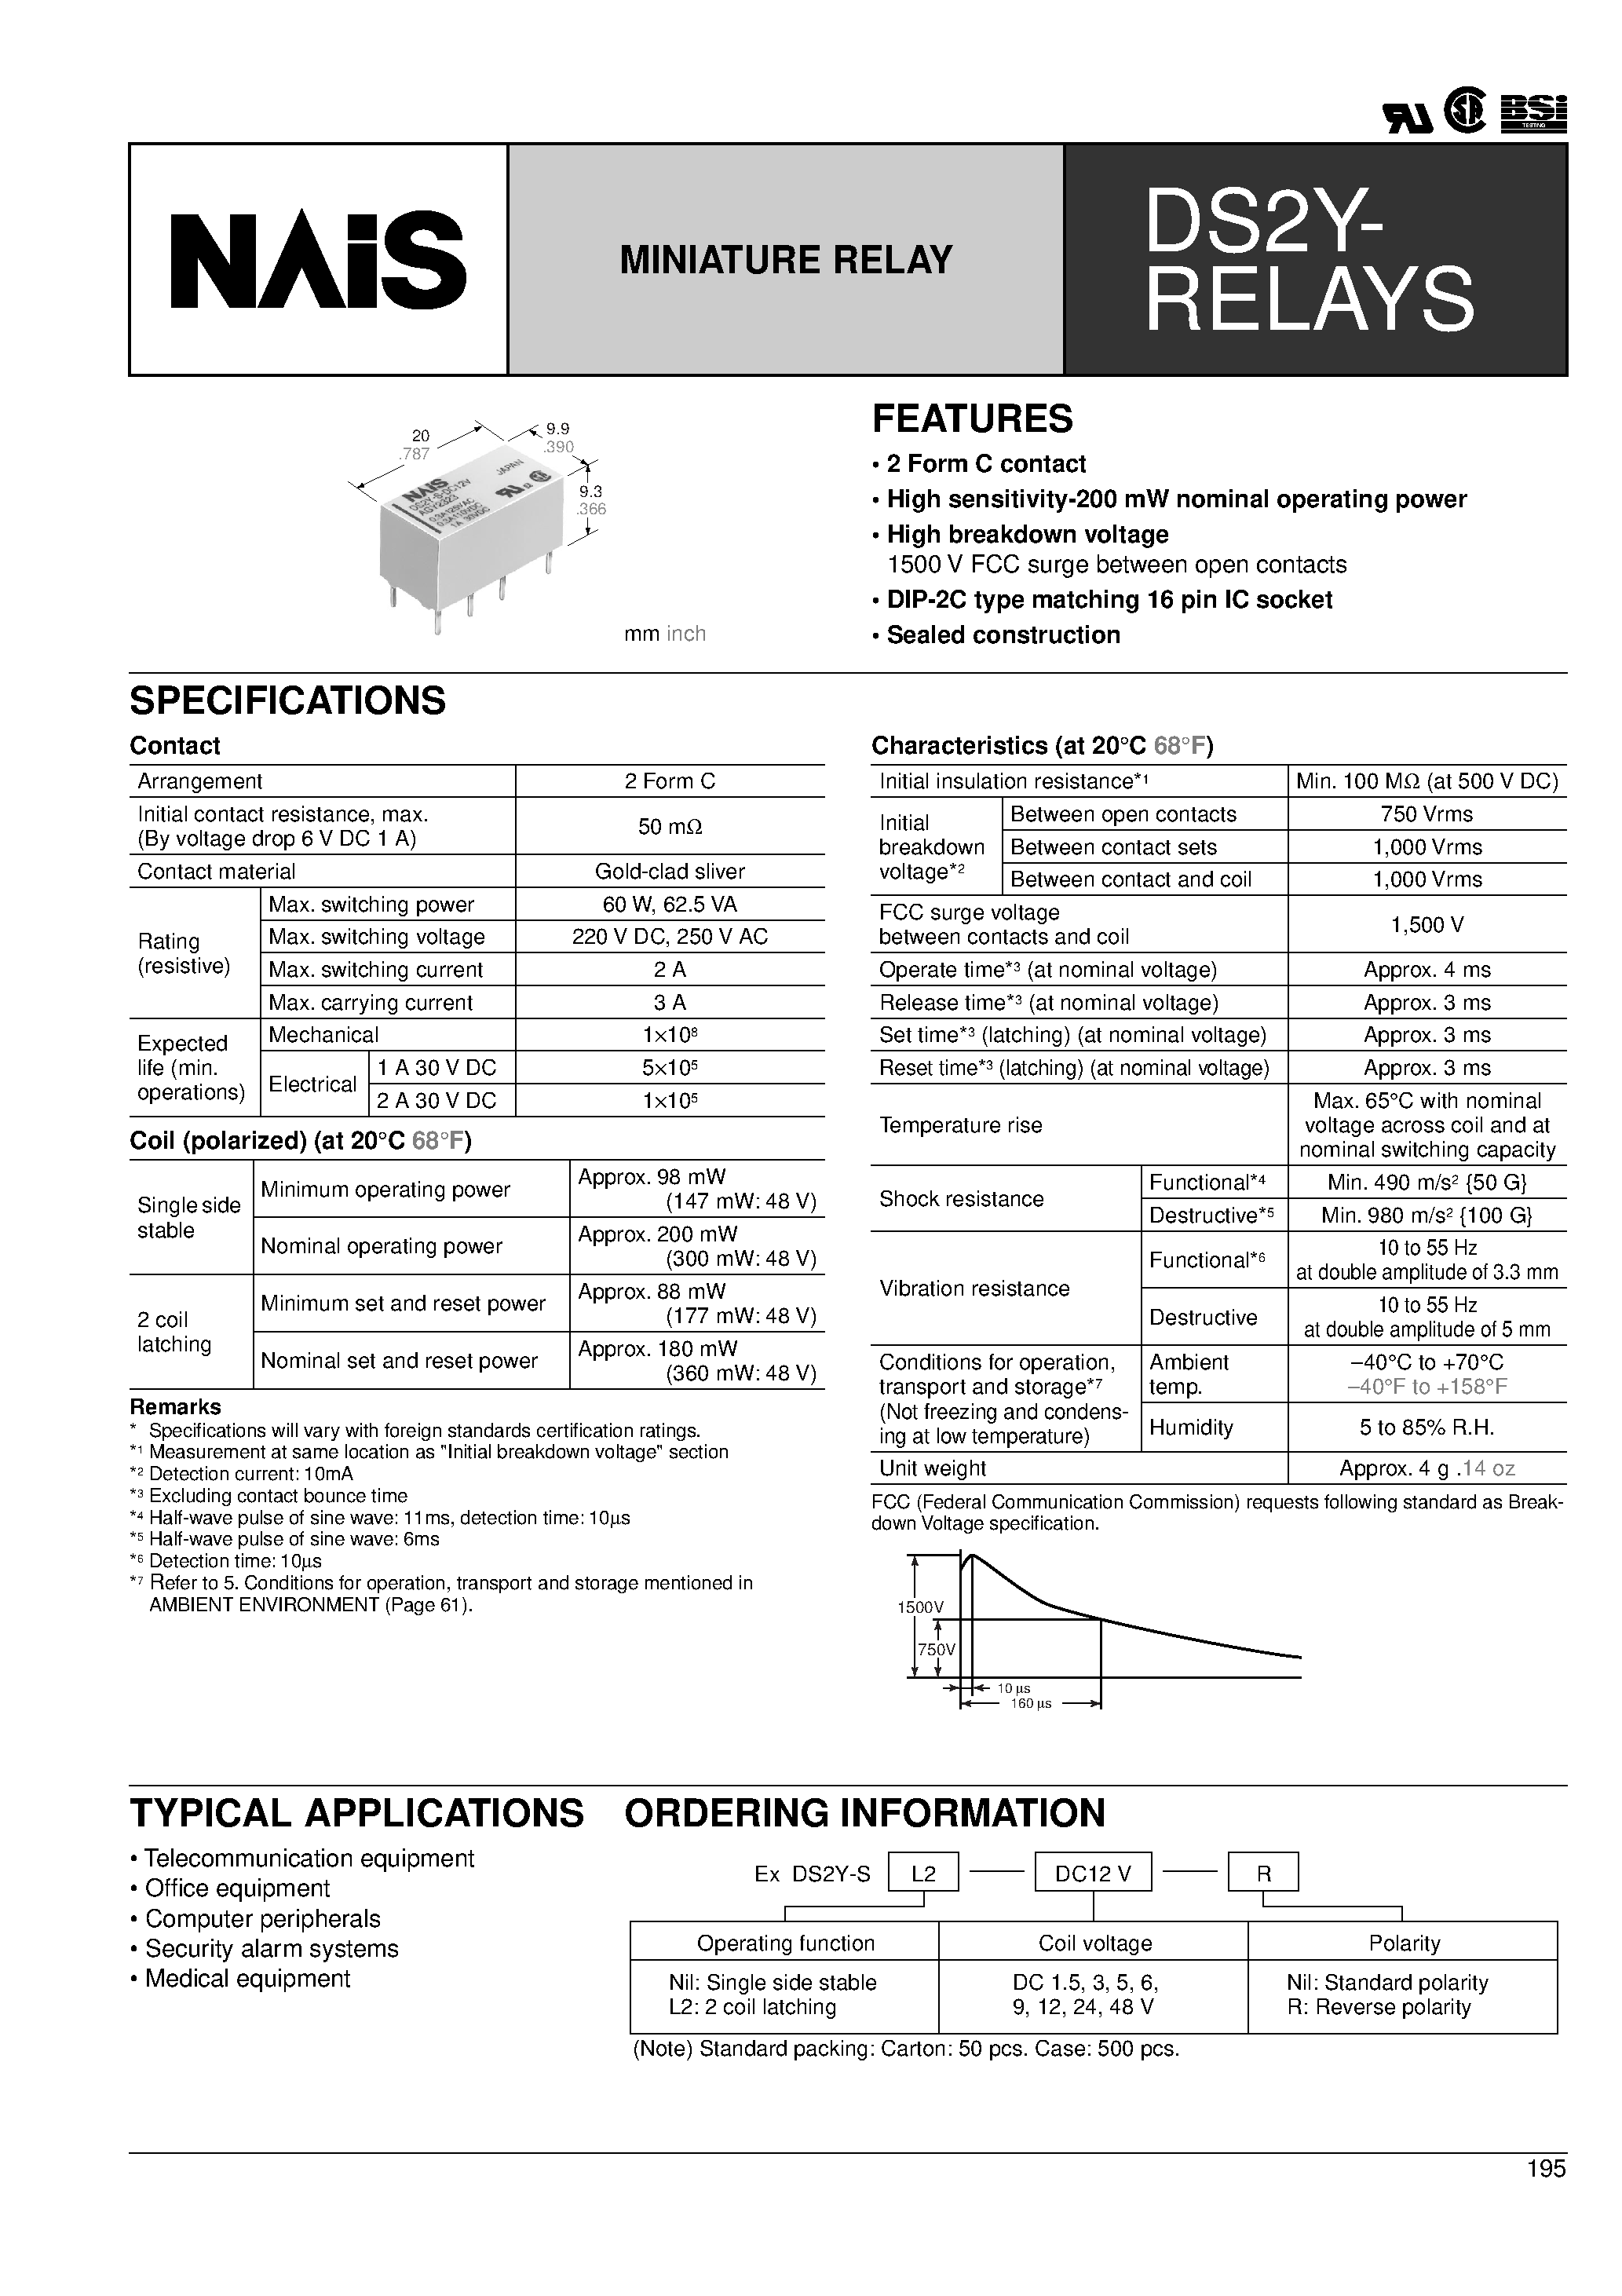 Datasheet DS2Y-SL2-DC24V - 2 Form C contact High sensitivity-200 mW nominal operating power page 1